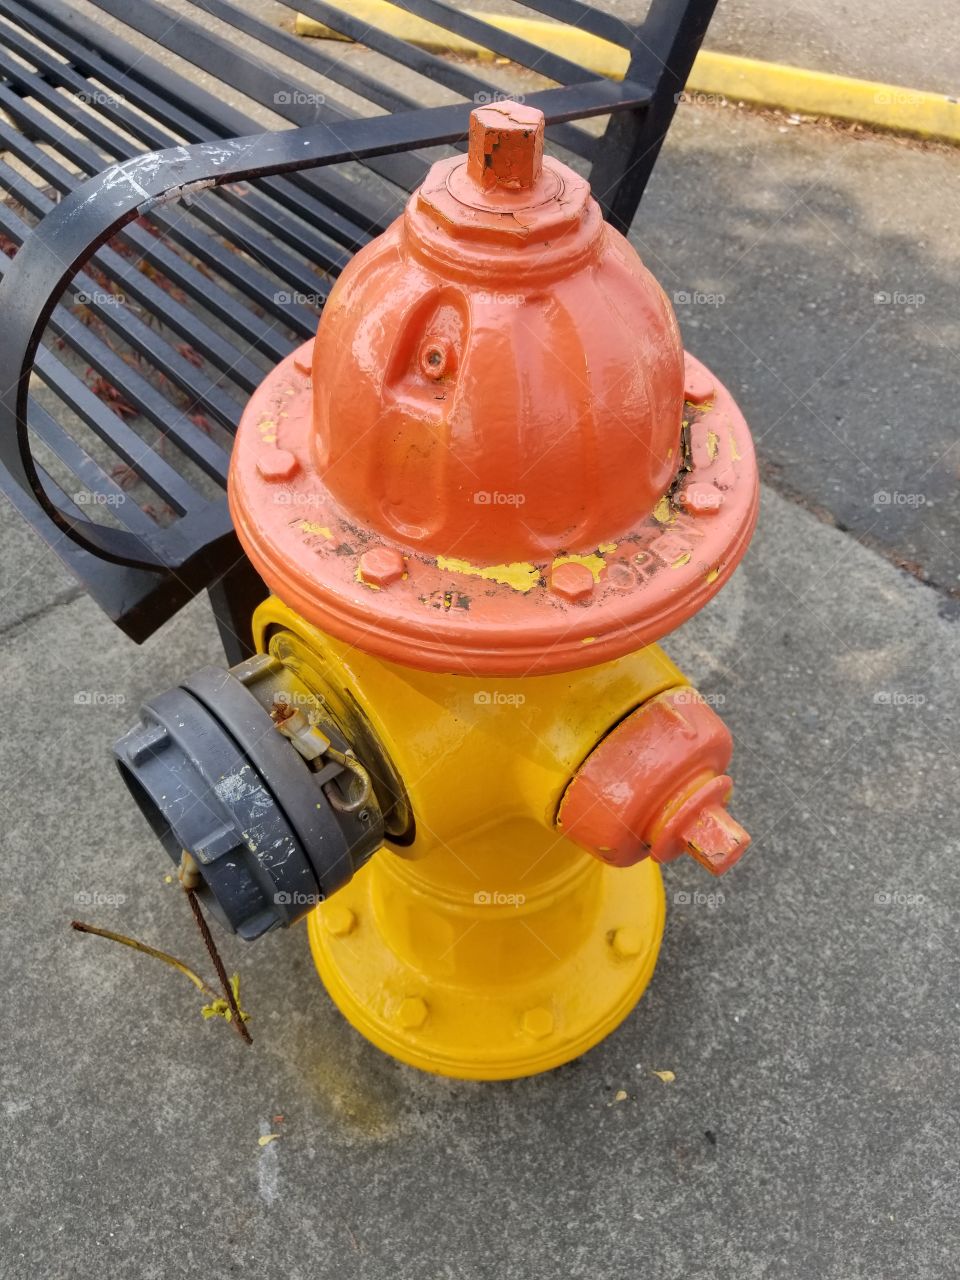 Cute small town fire hydrant